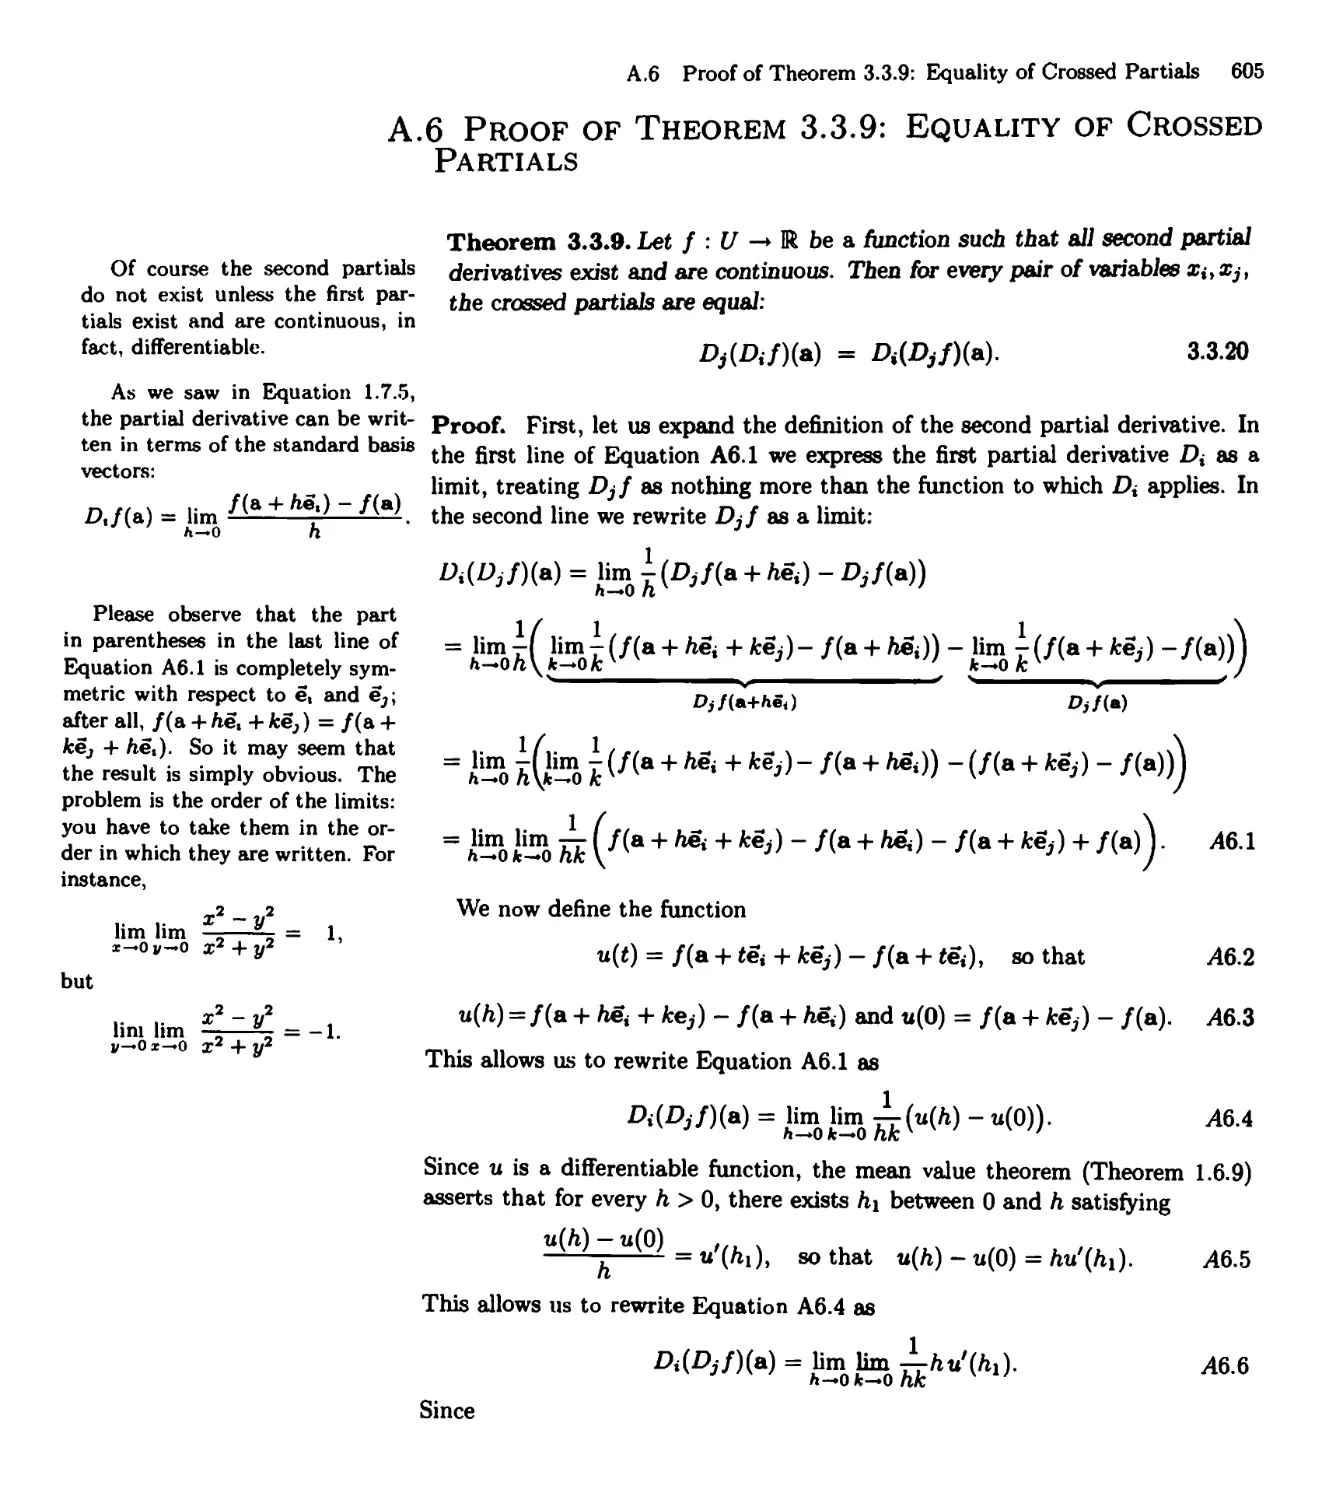 A.6 Proof of Theorem 3.3.9: Equality of Crossed Partials